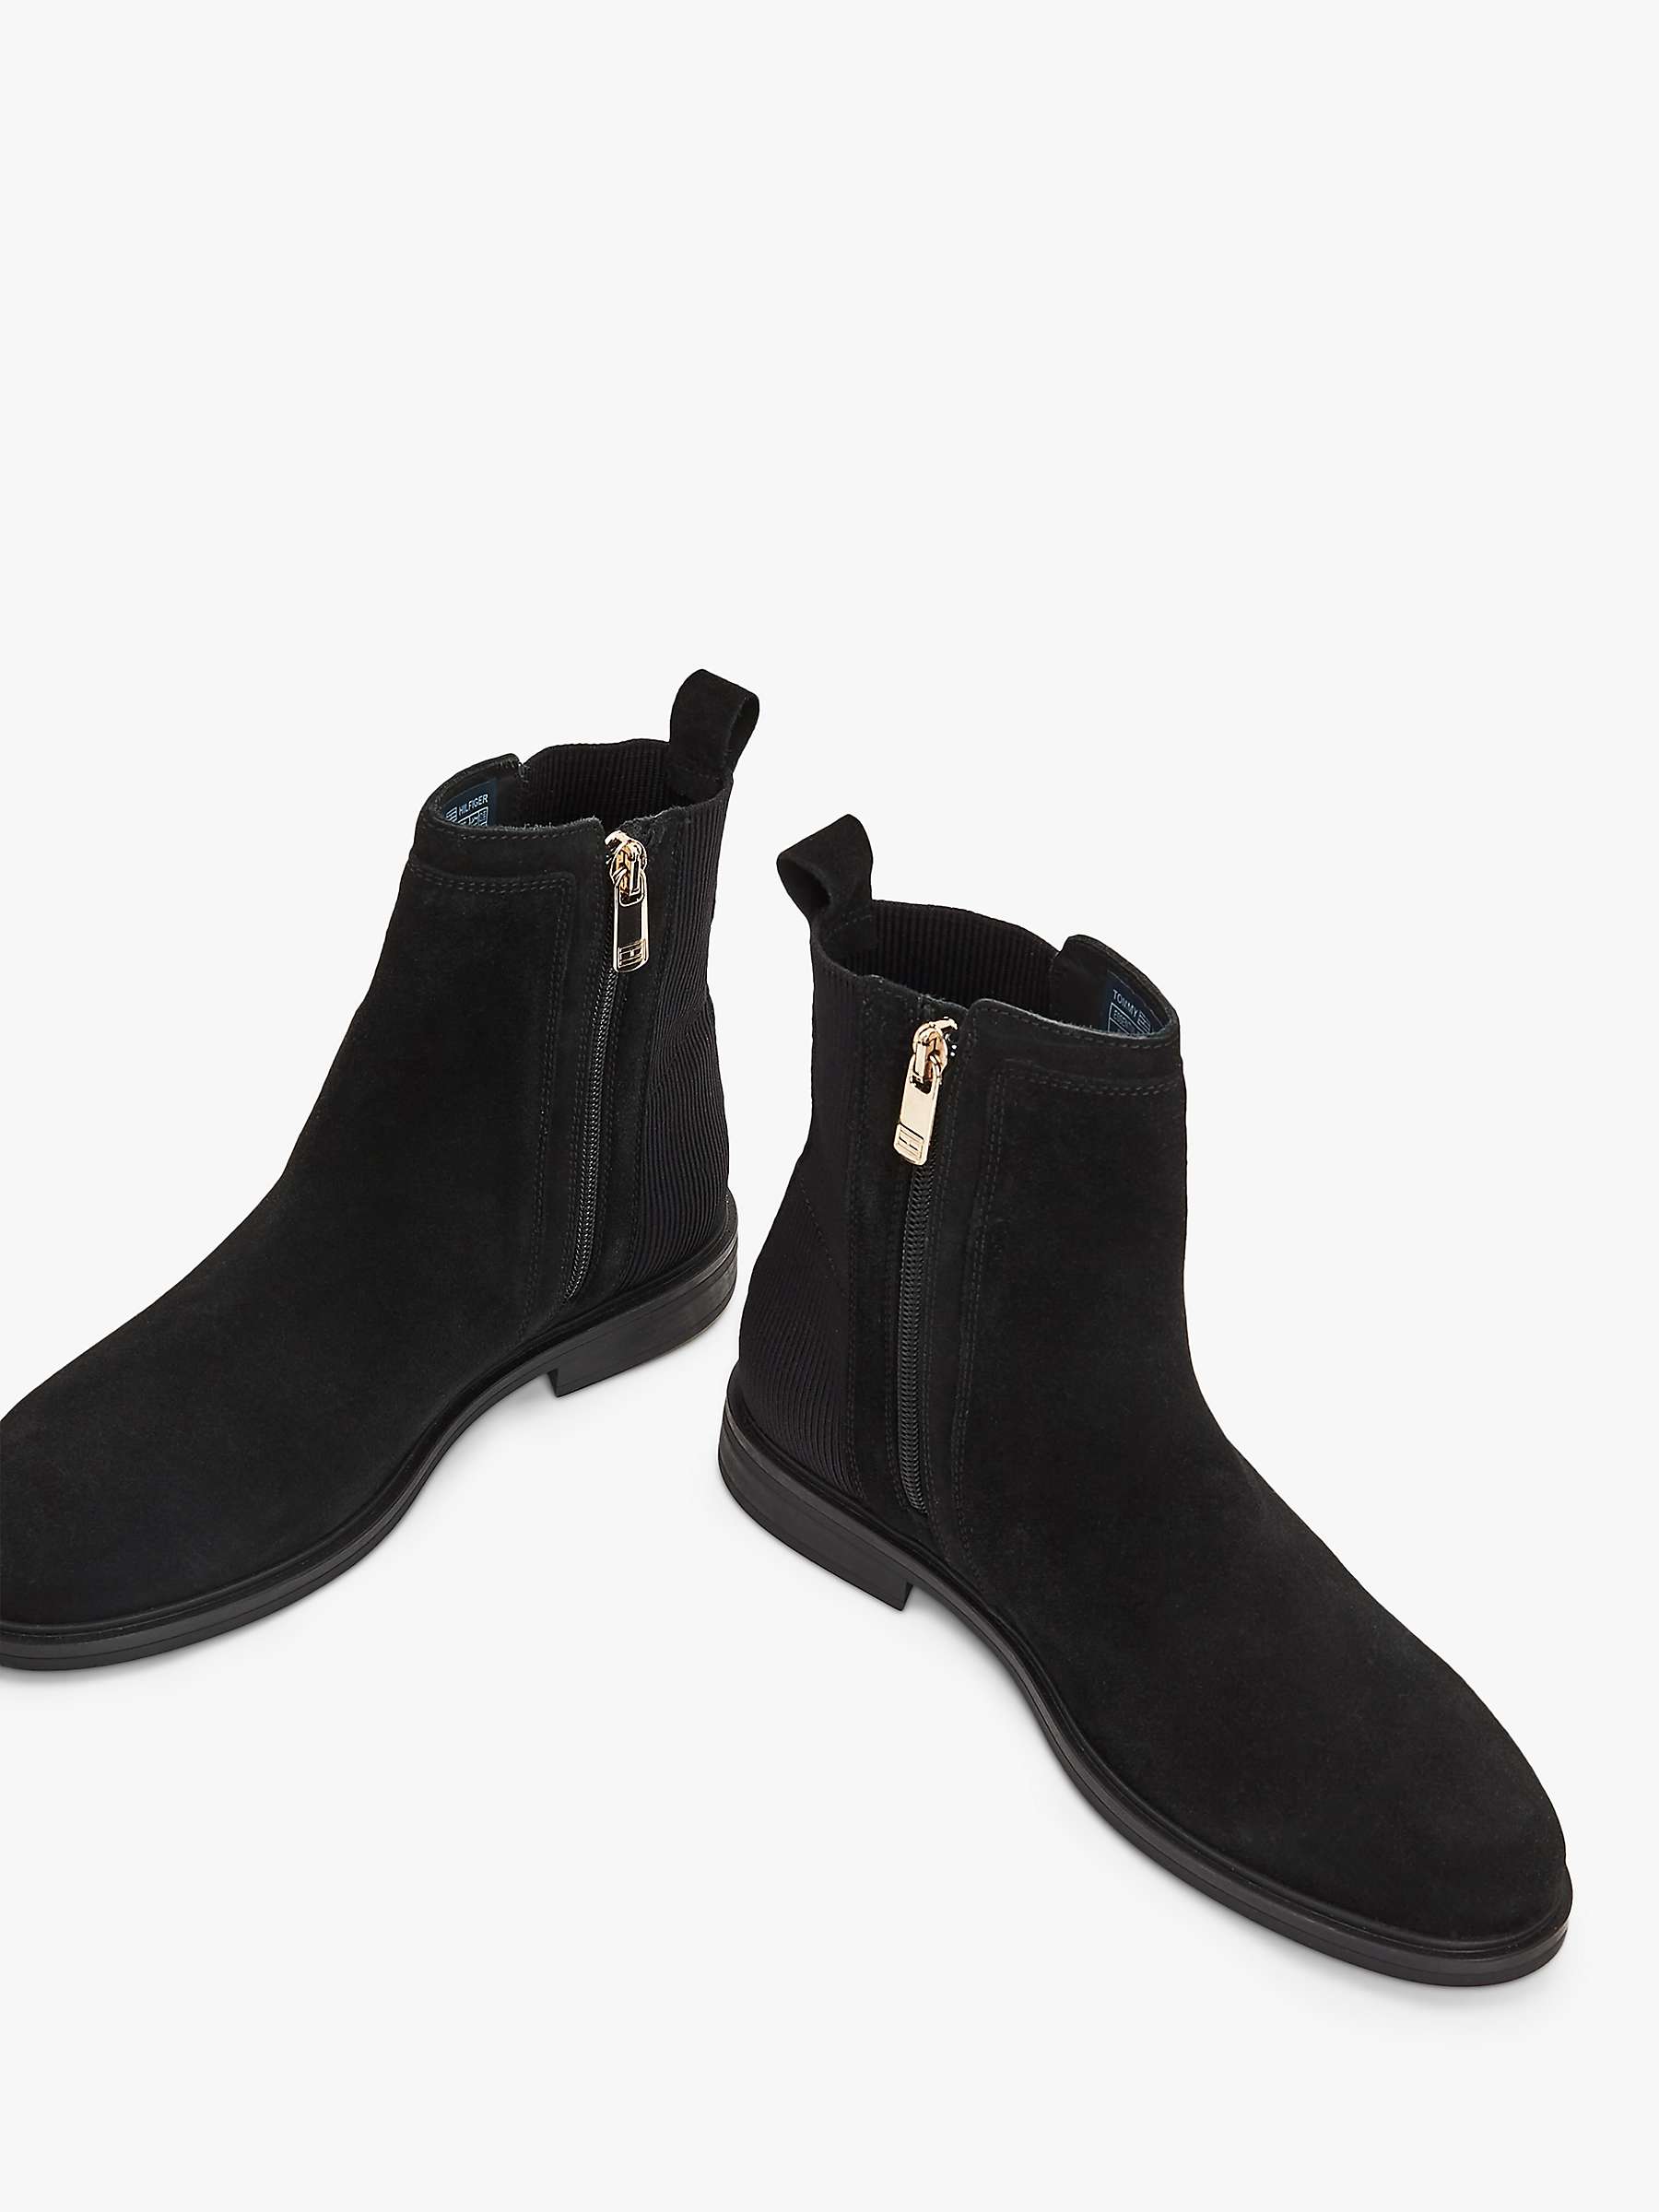 Tommy Hilfiger Suede Chelsea Boots, Black at John Lewis & Partners